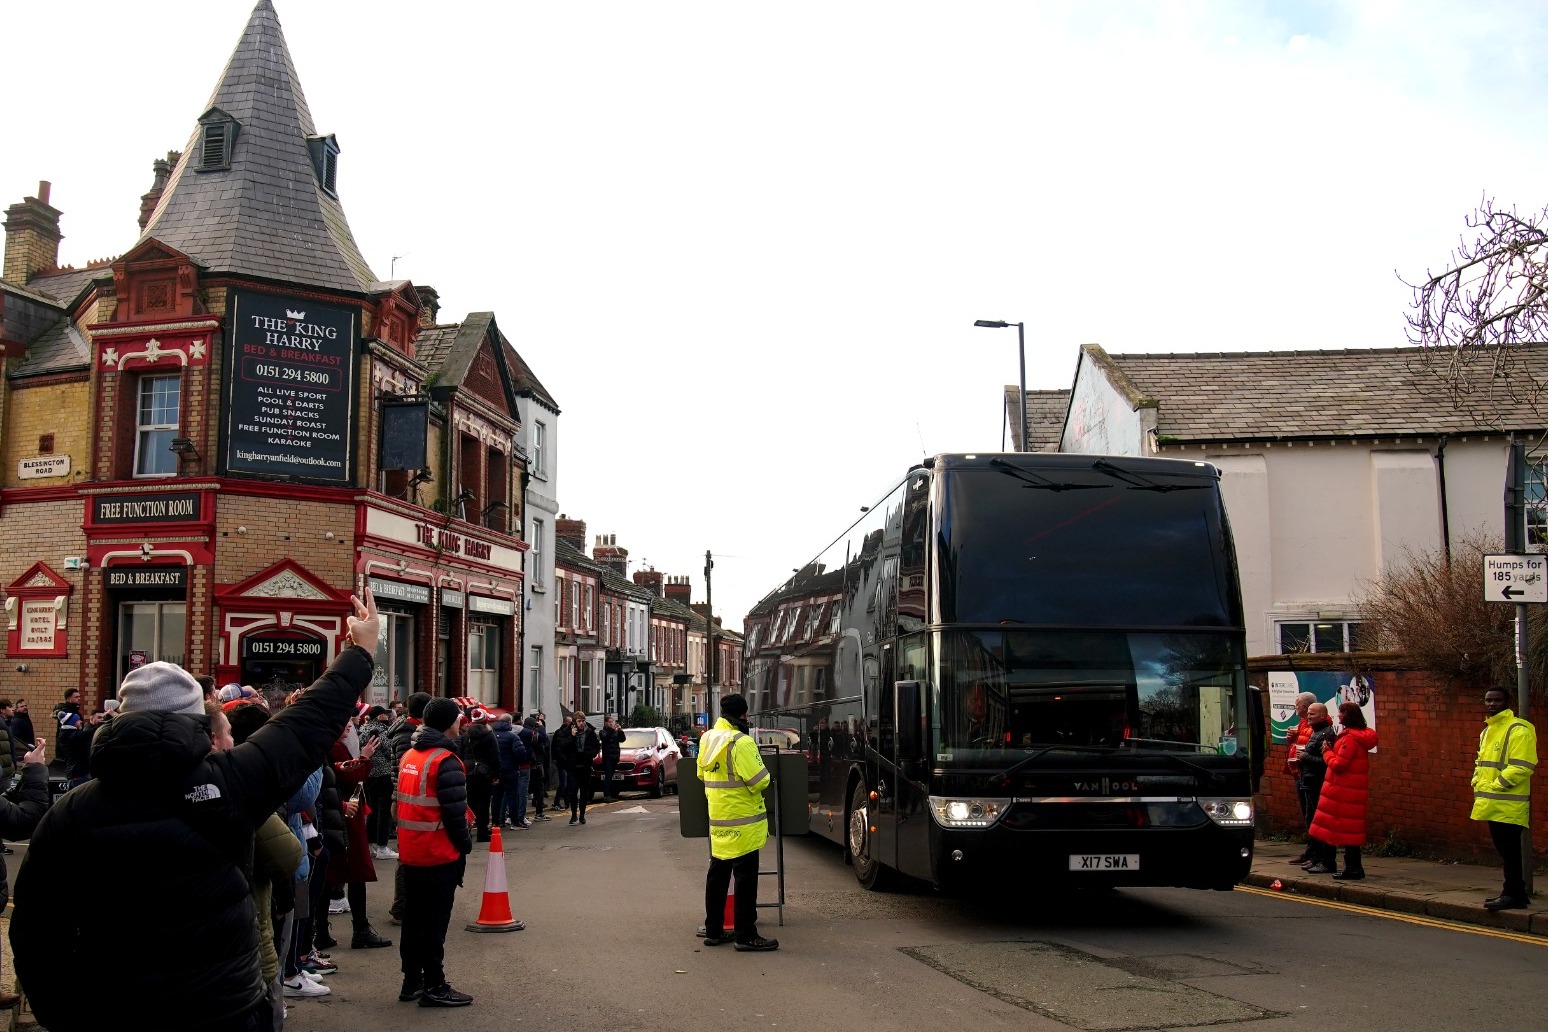 Manchester United team bus damaged en route to Anfield 